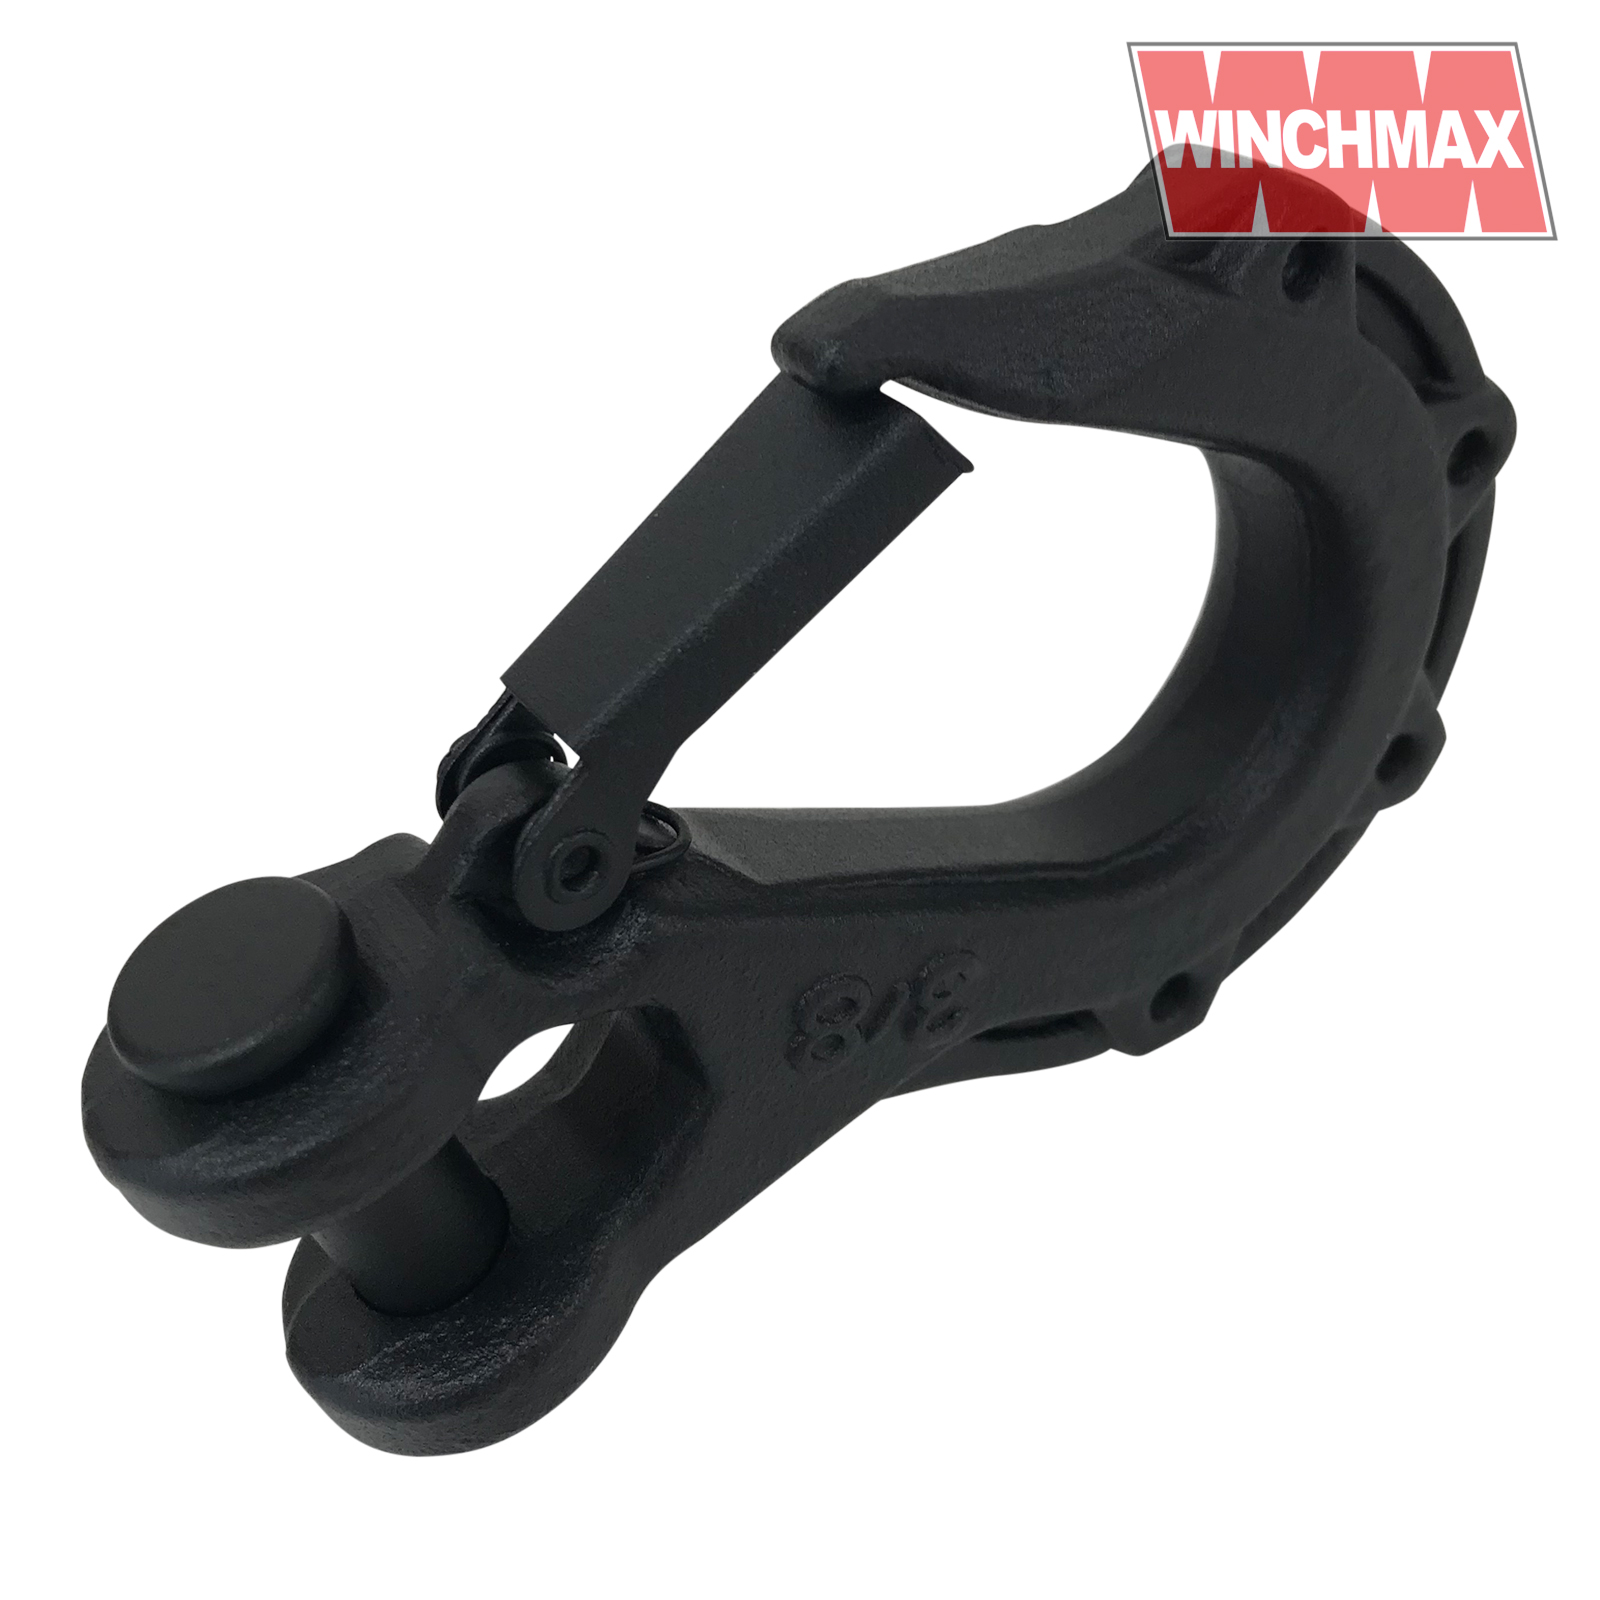 Winchmax 3/8 Inch Tactical Clevis Hook